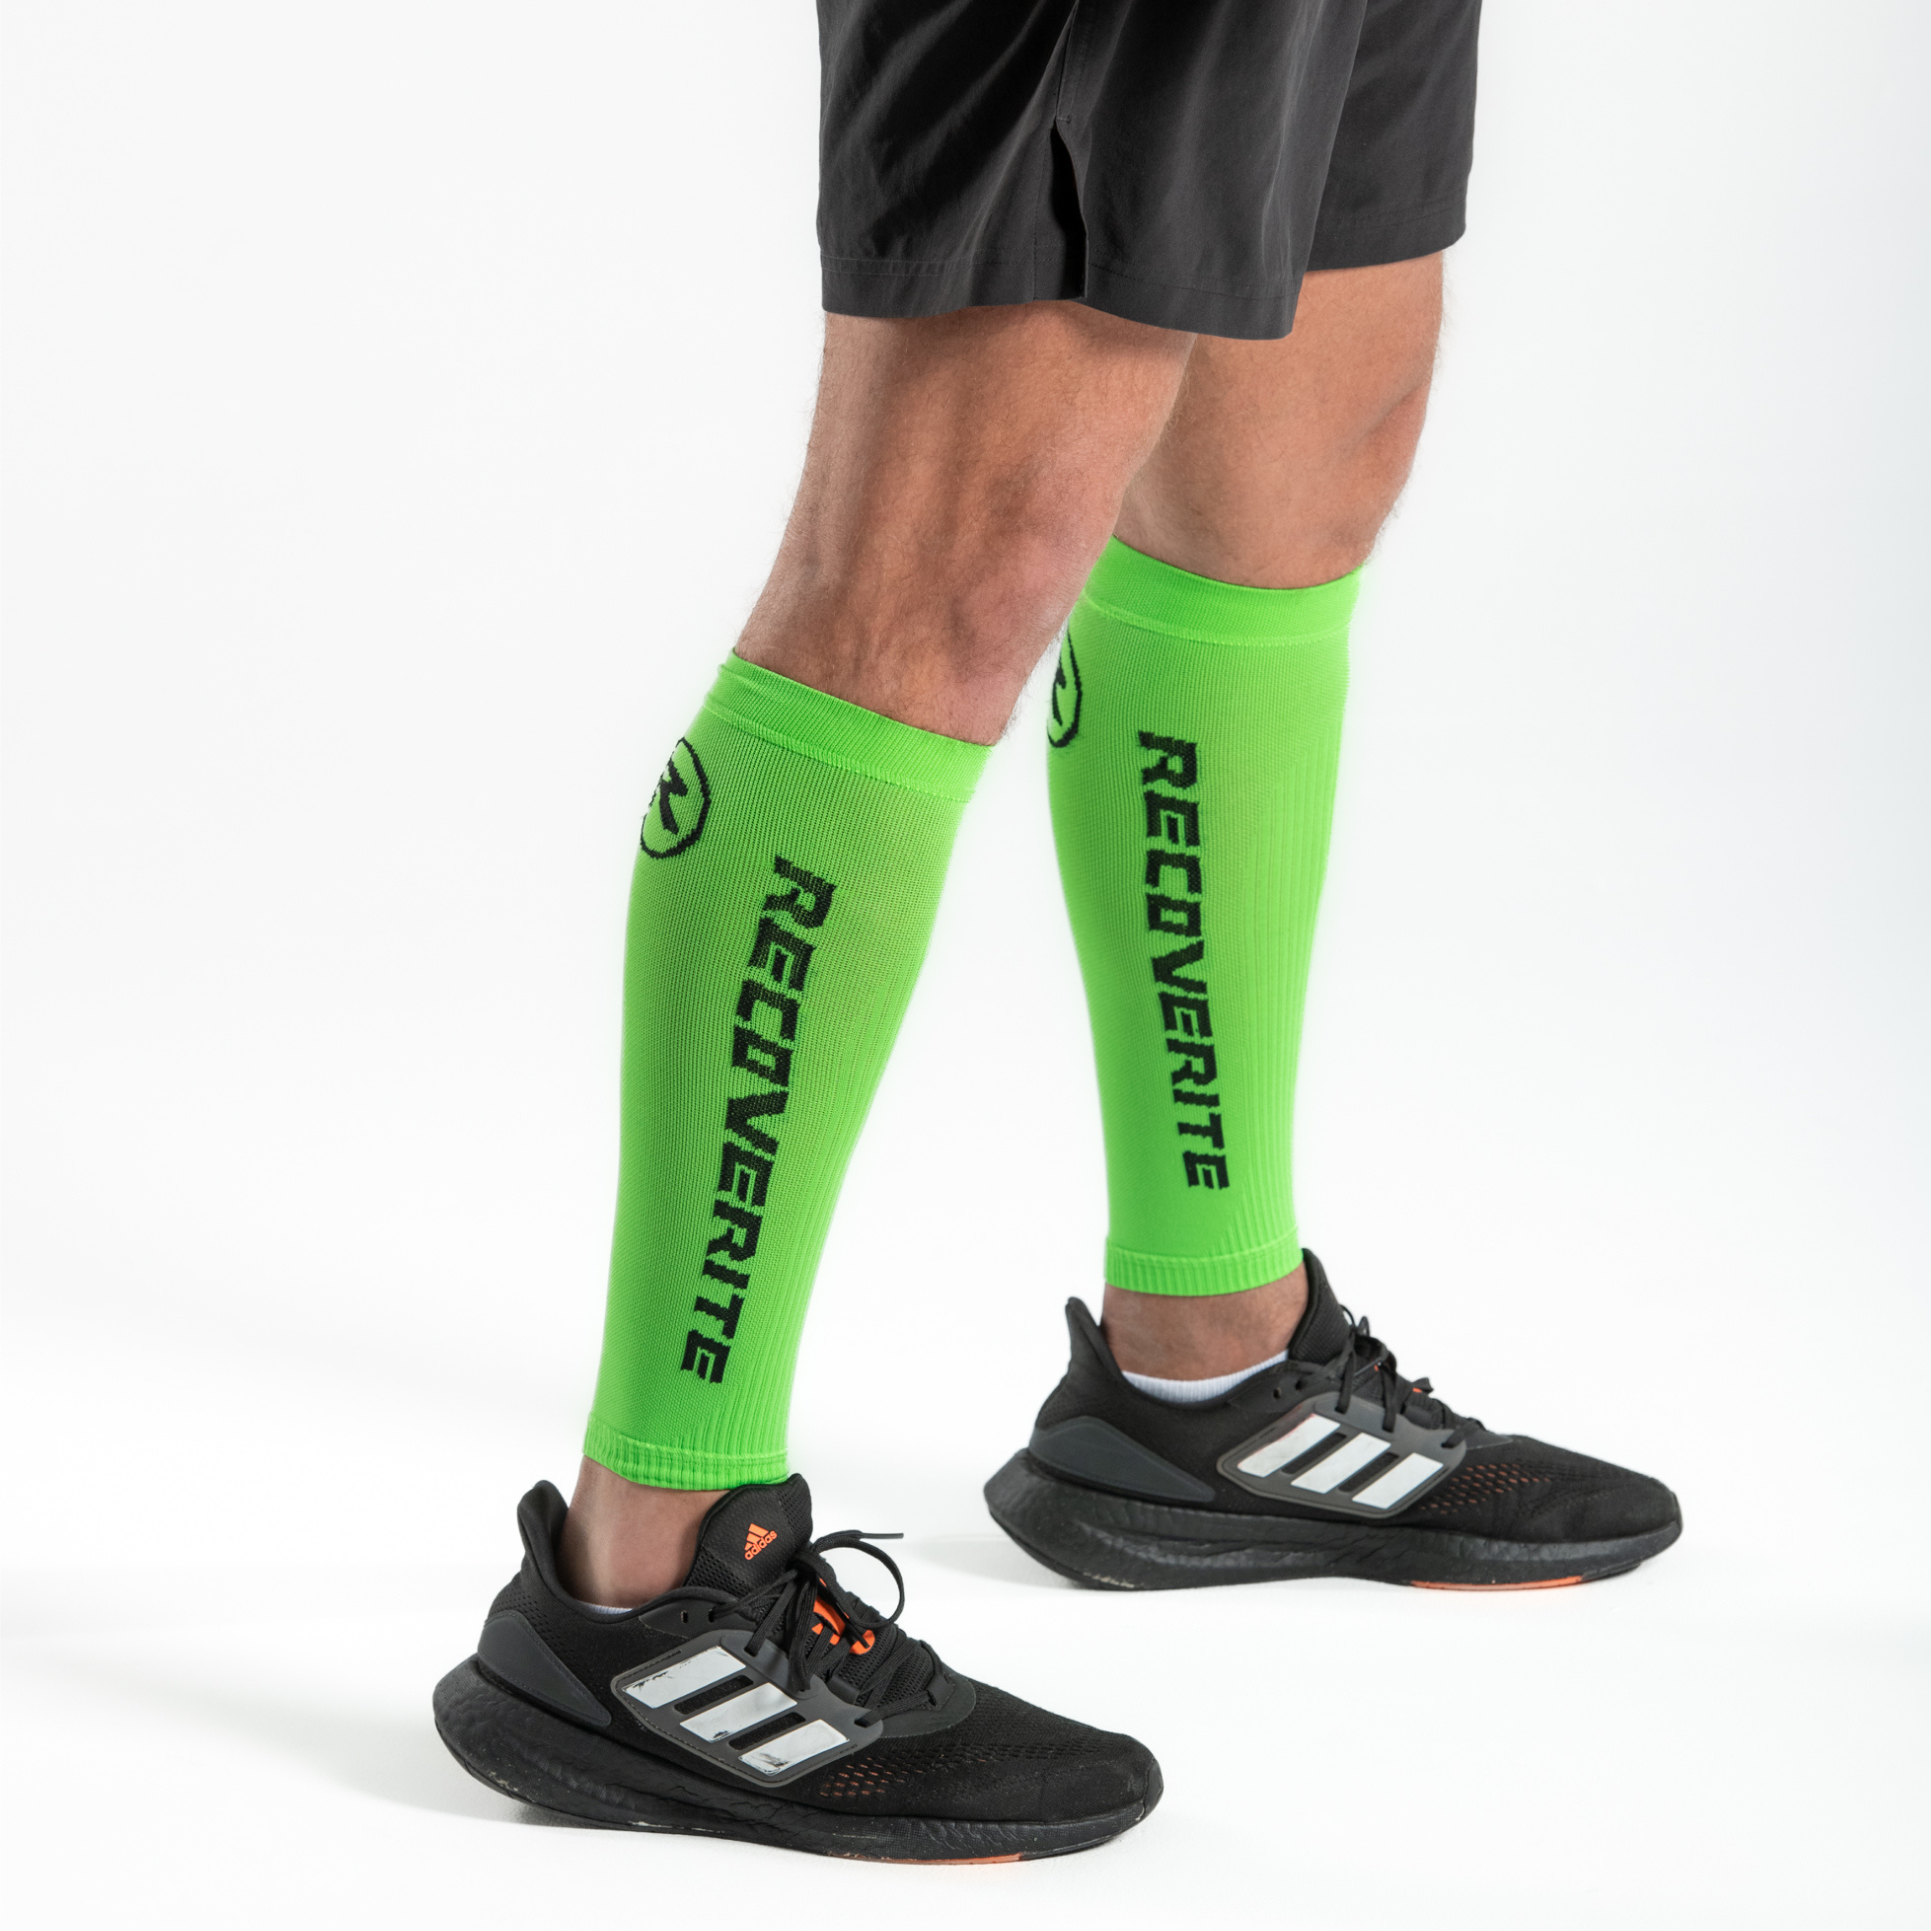 Product Advice - Compression — RecoverFit